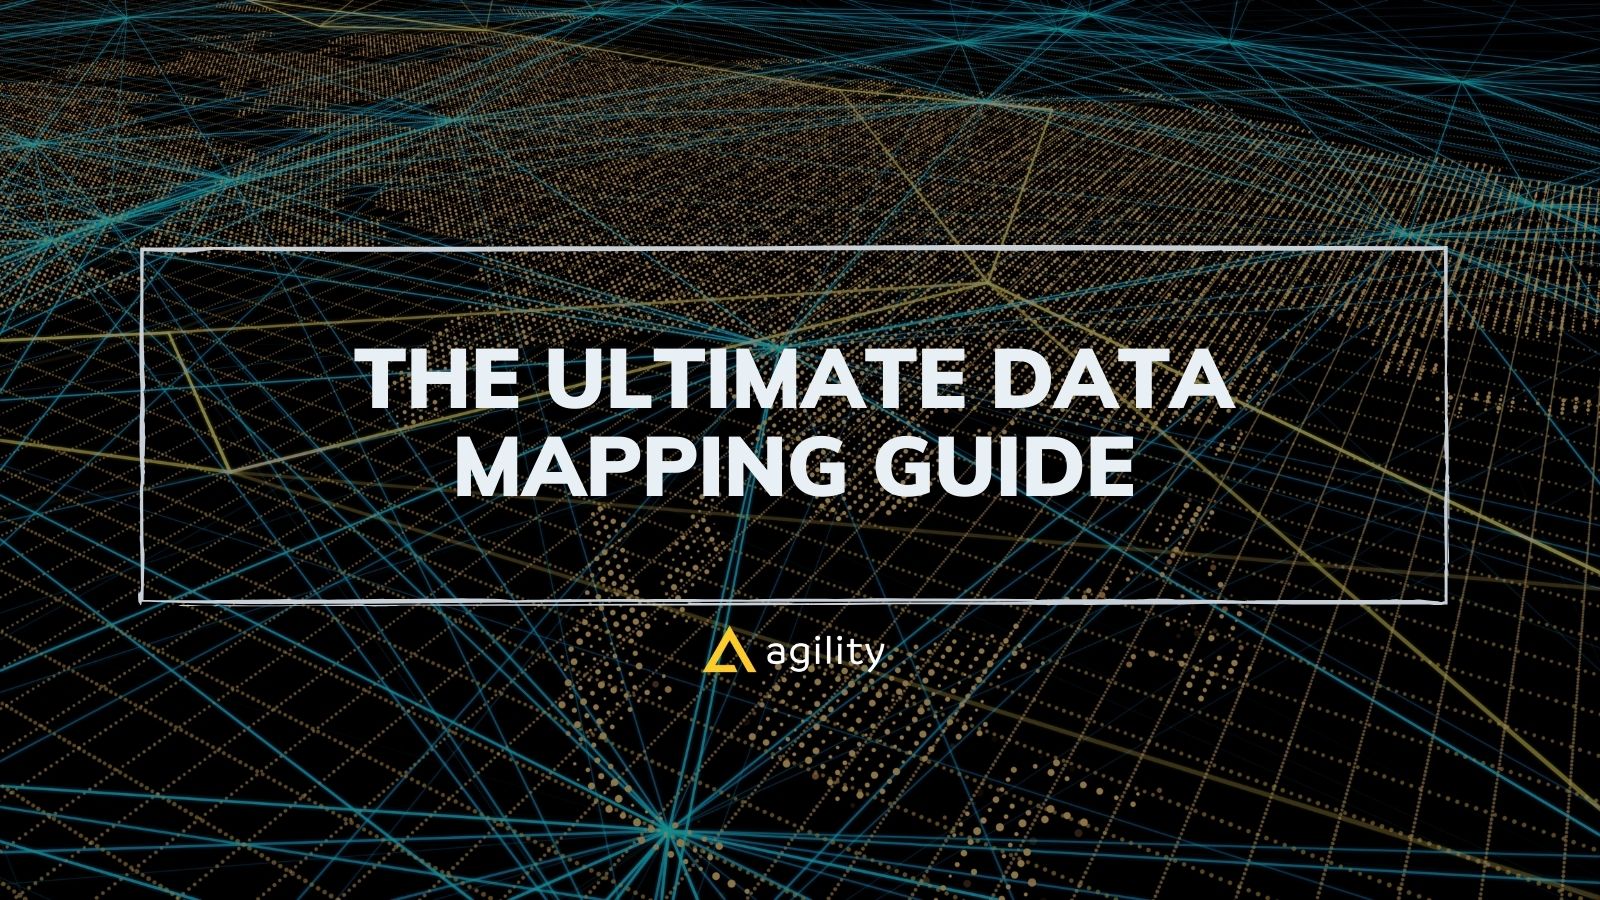 The Full Data Mapping Guide Agility CMS